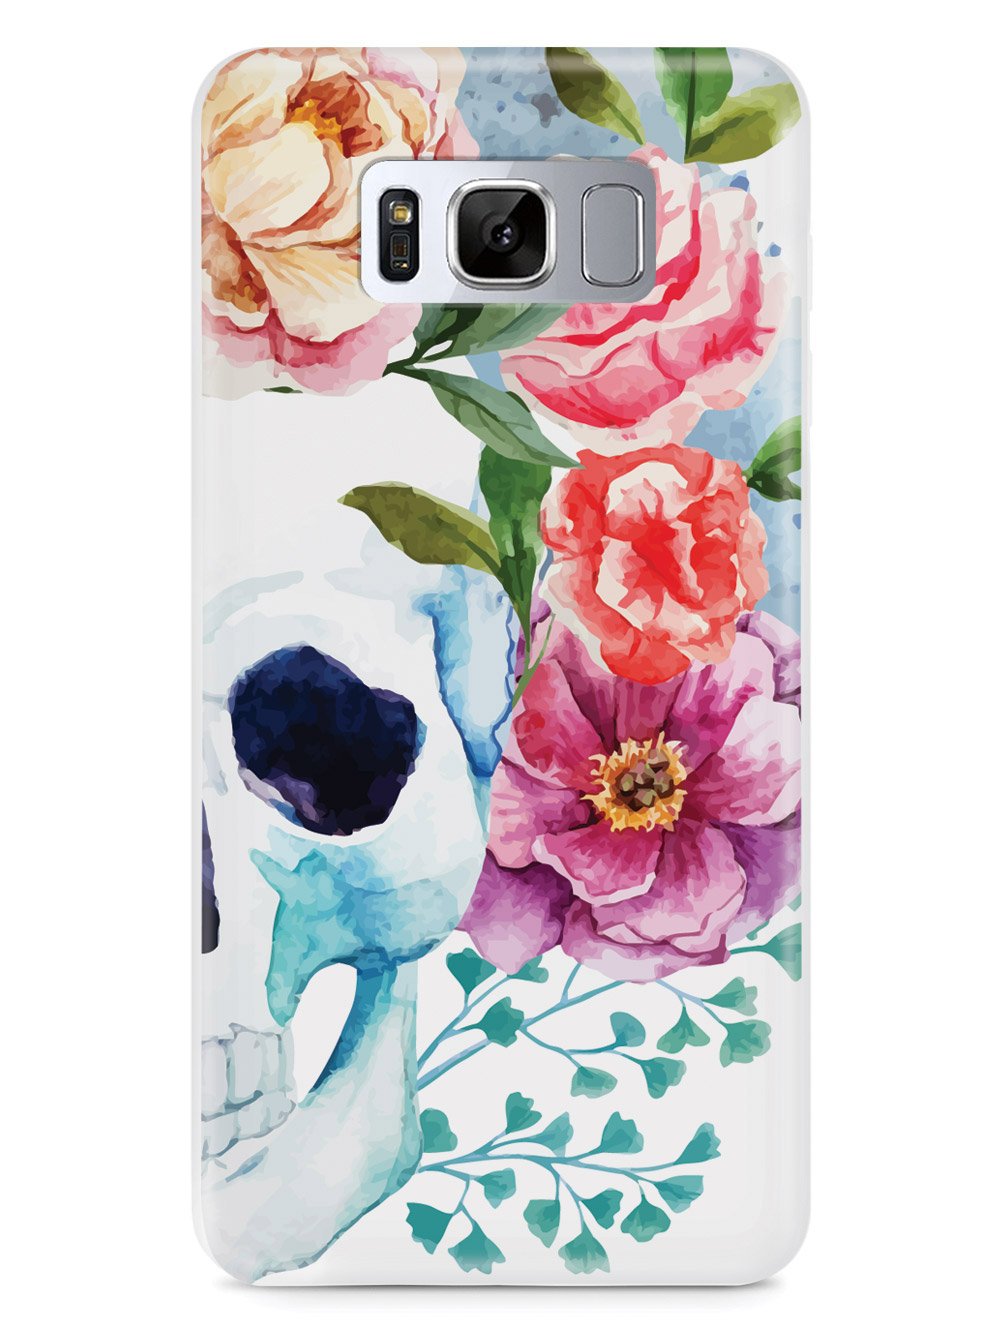 Watercolor Skull and Flowers Case